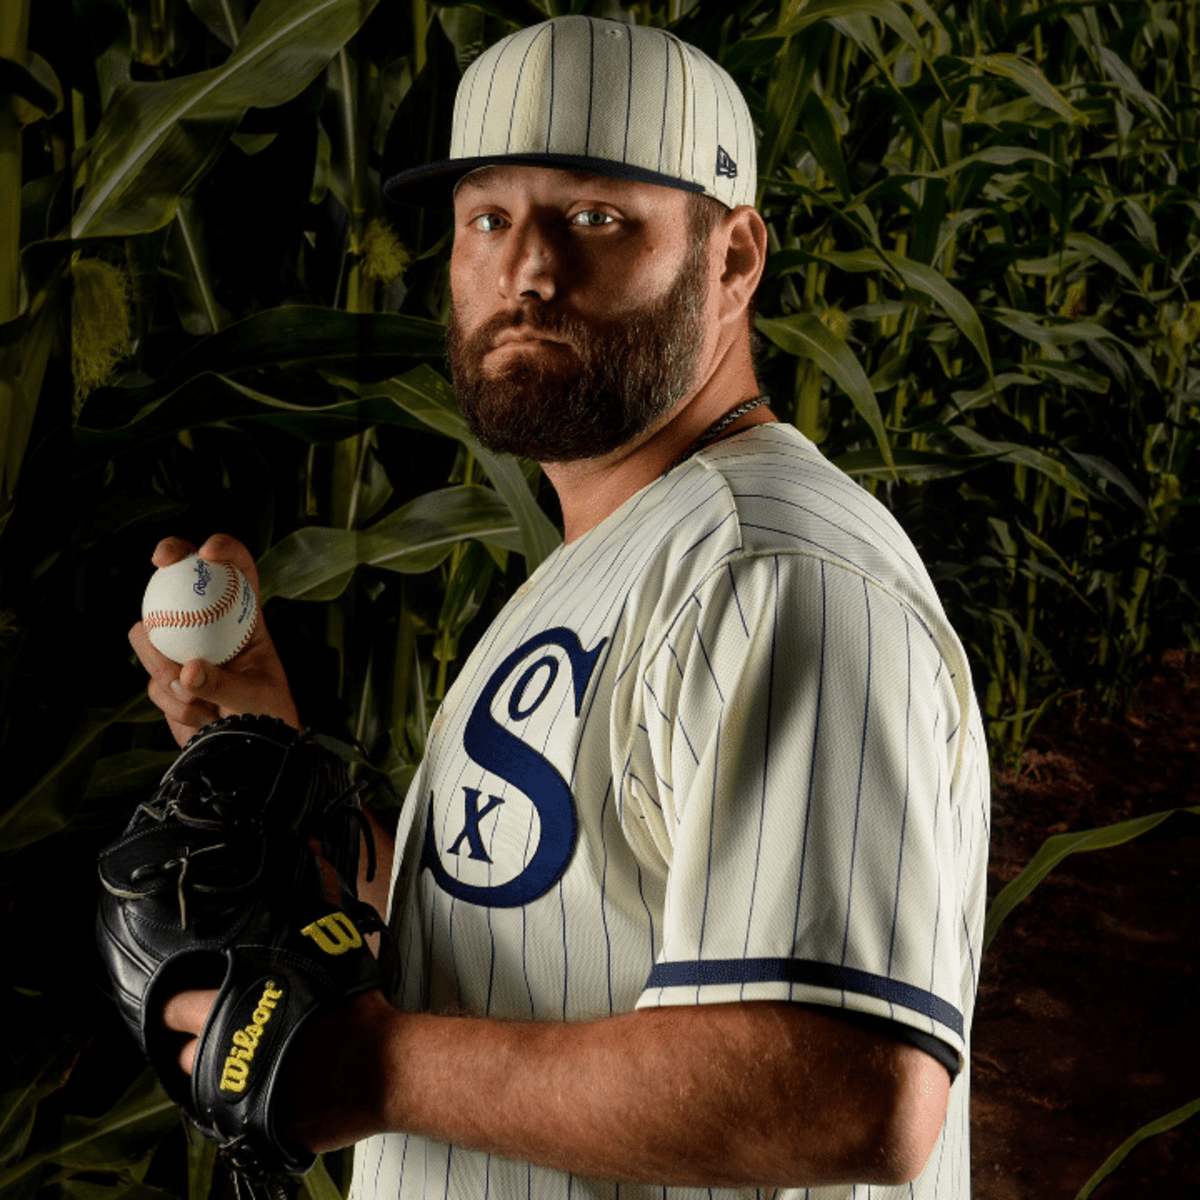 Lance Lynn: A look at the Chicago White Sox, former Ole Miss pitcher